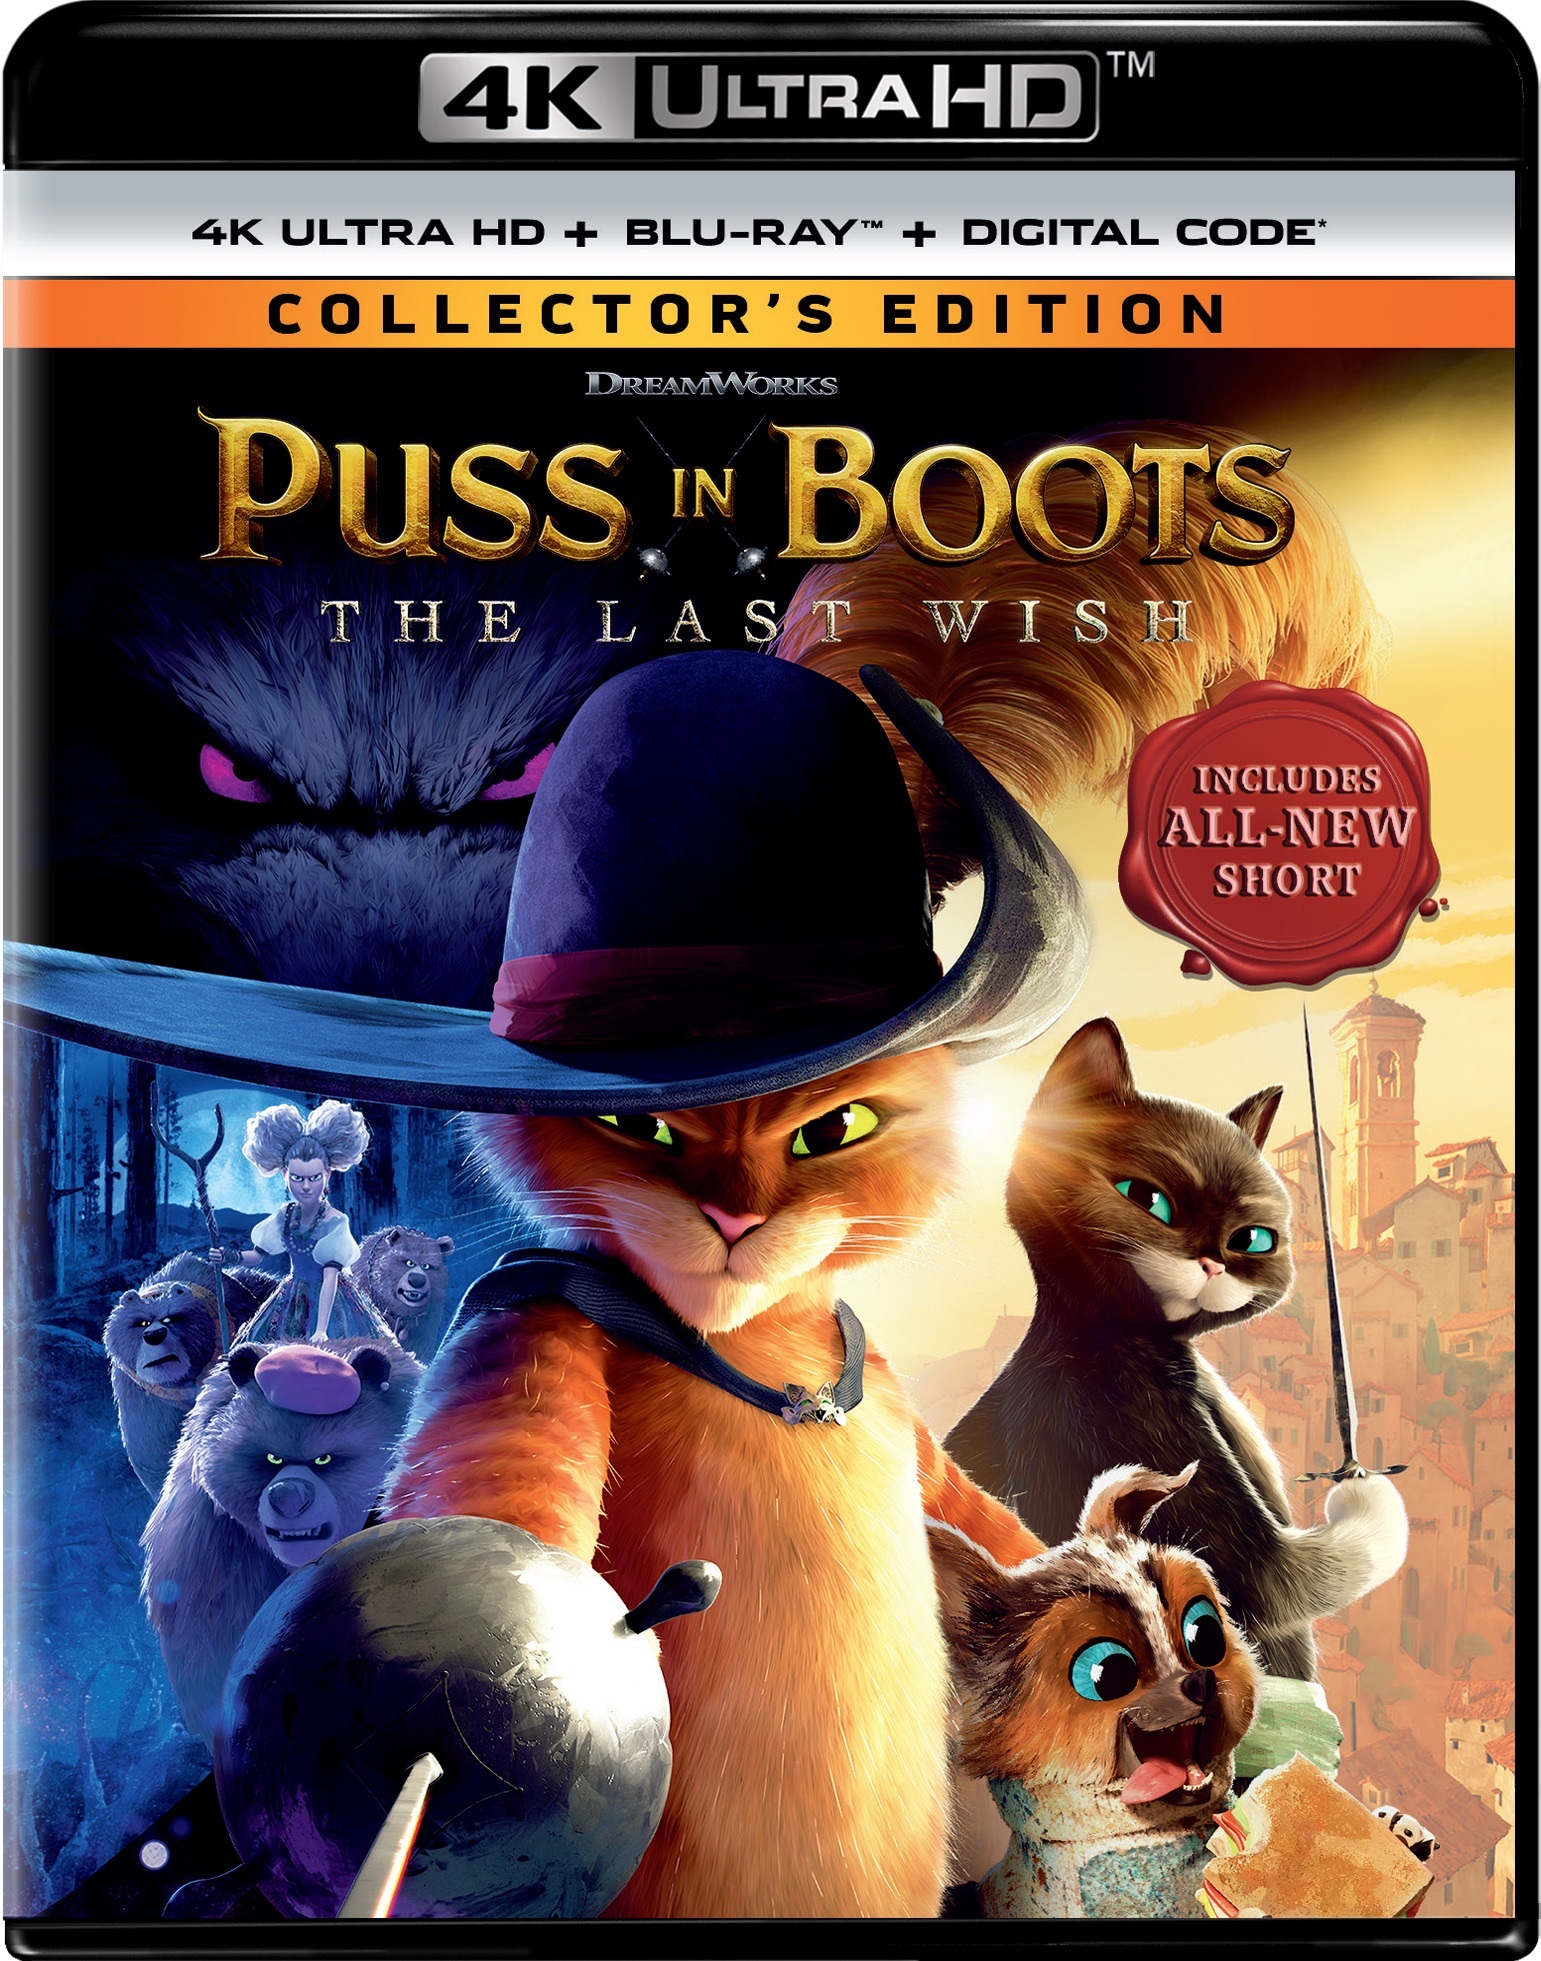 Puss In Boots: The Last Wish (4K Ultra HD + Blu-ray) - UHD [ 2022 ]  - Animation Movies On 4K Ultra HD Blu-ray - Movies On GRUV